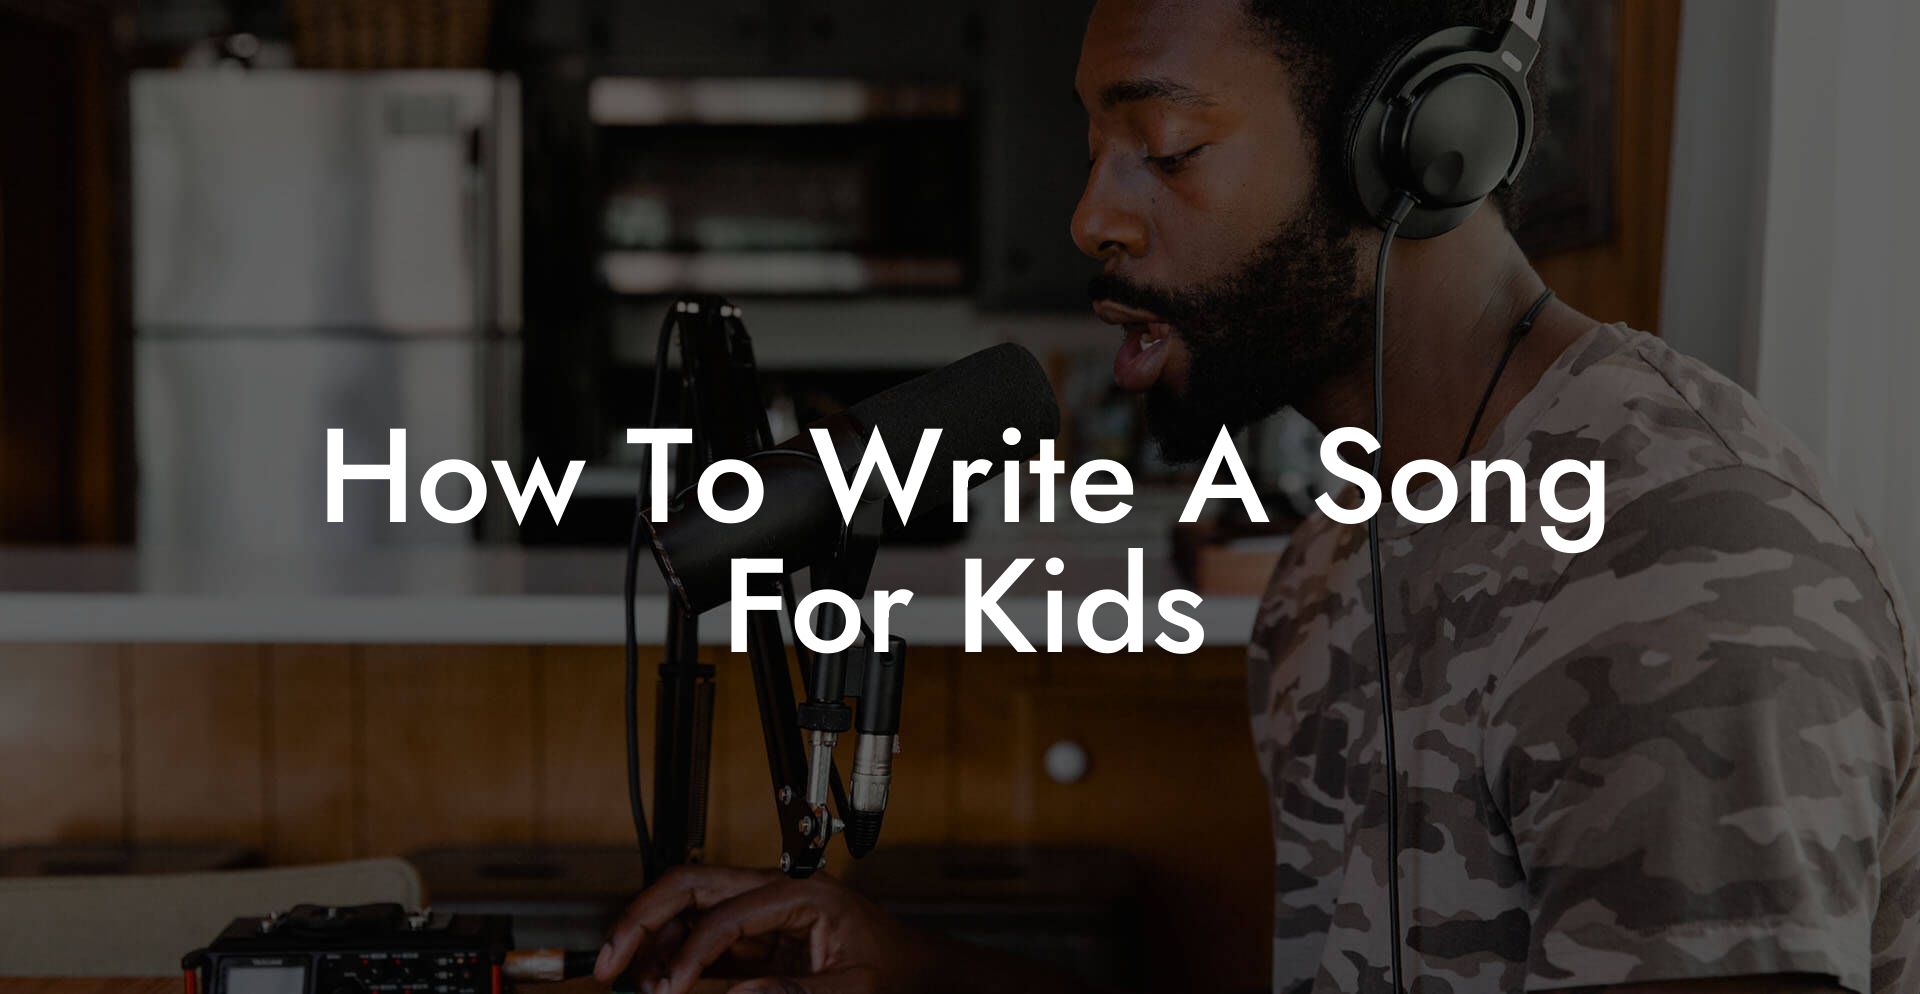 how to write a song for kids lyric assistant